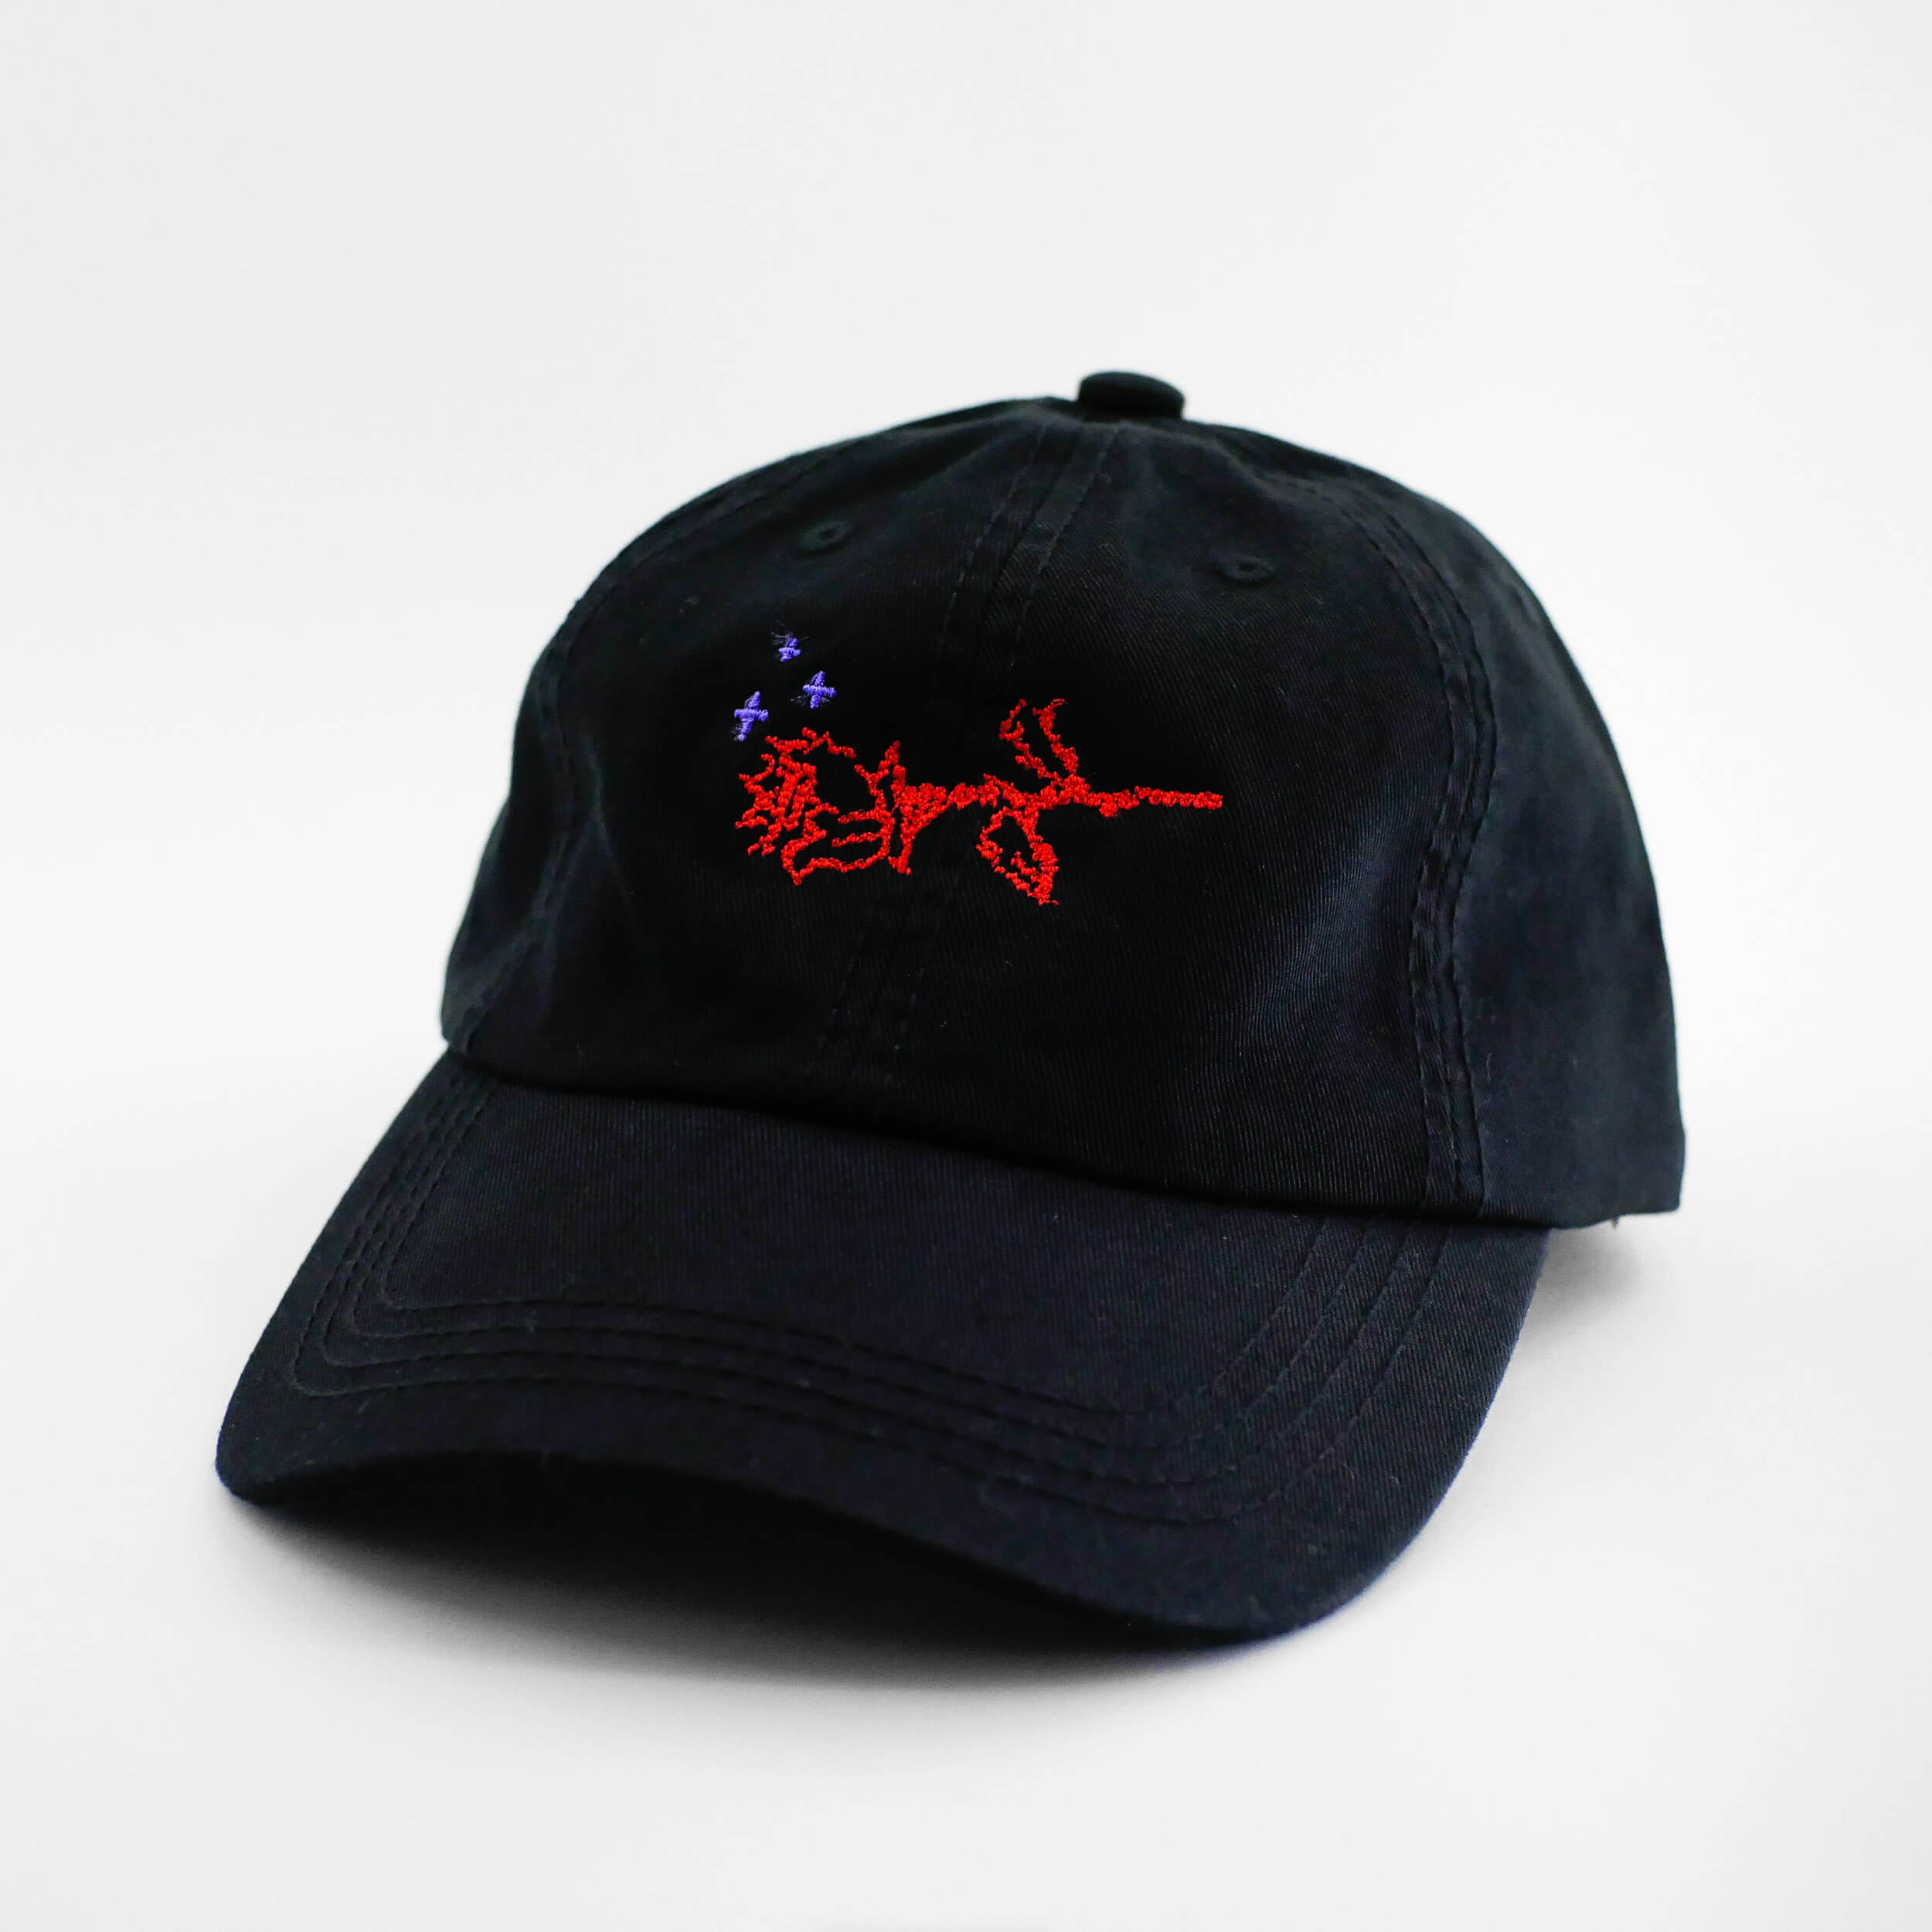 Angle view of the embroidered ASCII Rose black dad hat from PHOSIS Clothing